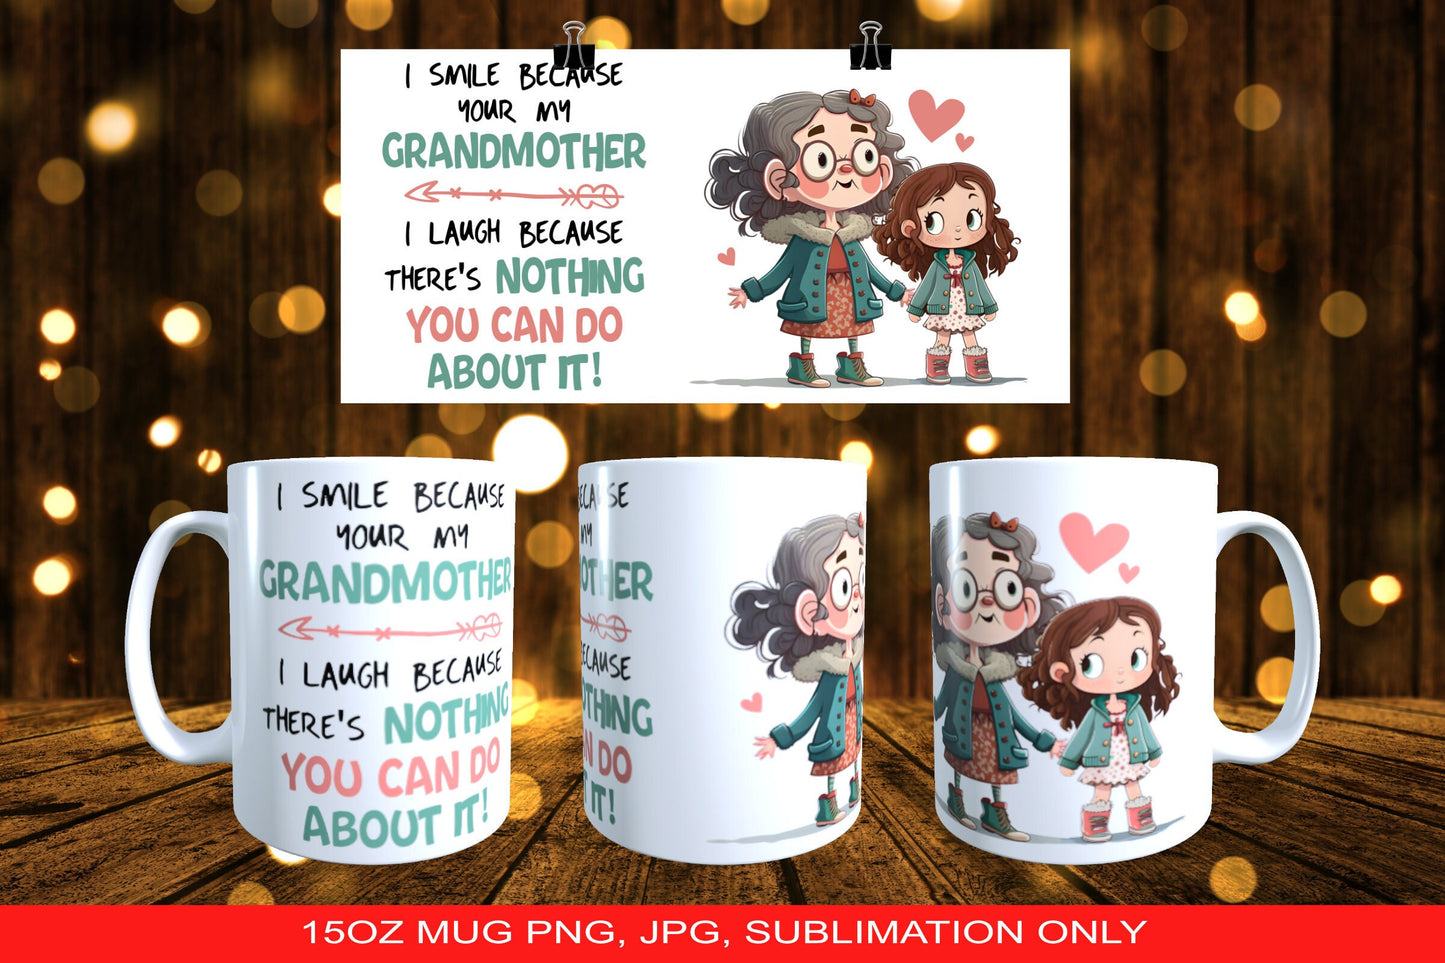 I Smile Because You're My Grandmother - A Fun-Loving design with a Touch of Love and Laughter! 15oz Sublimation Mug Wrap PNG and JPEG